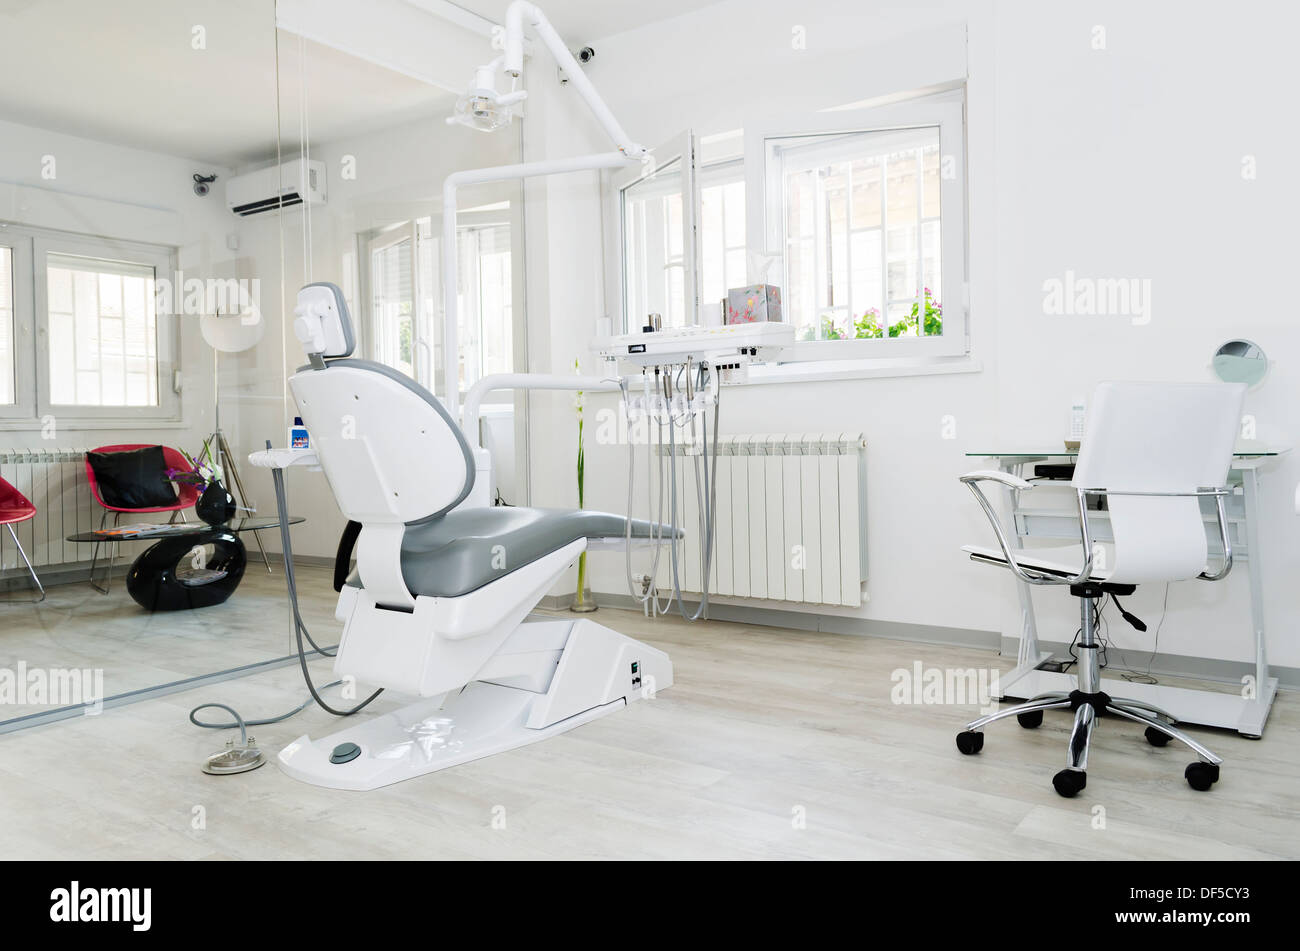 Dental office with dental chair Stock Photo